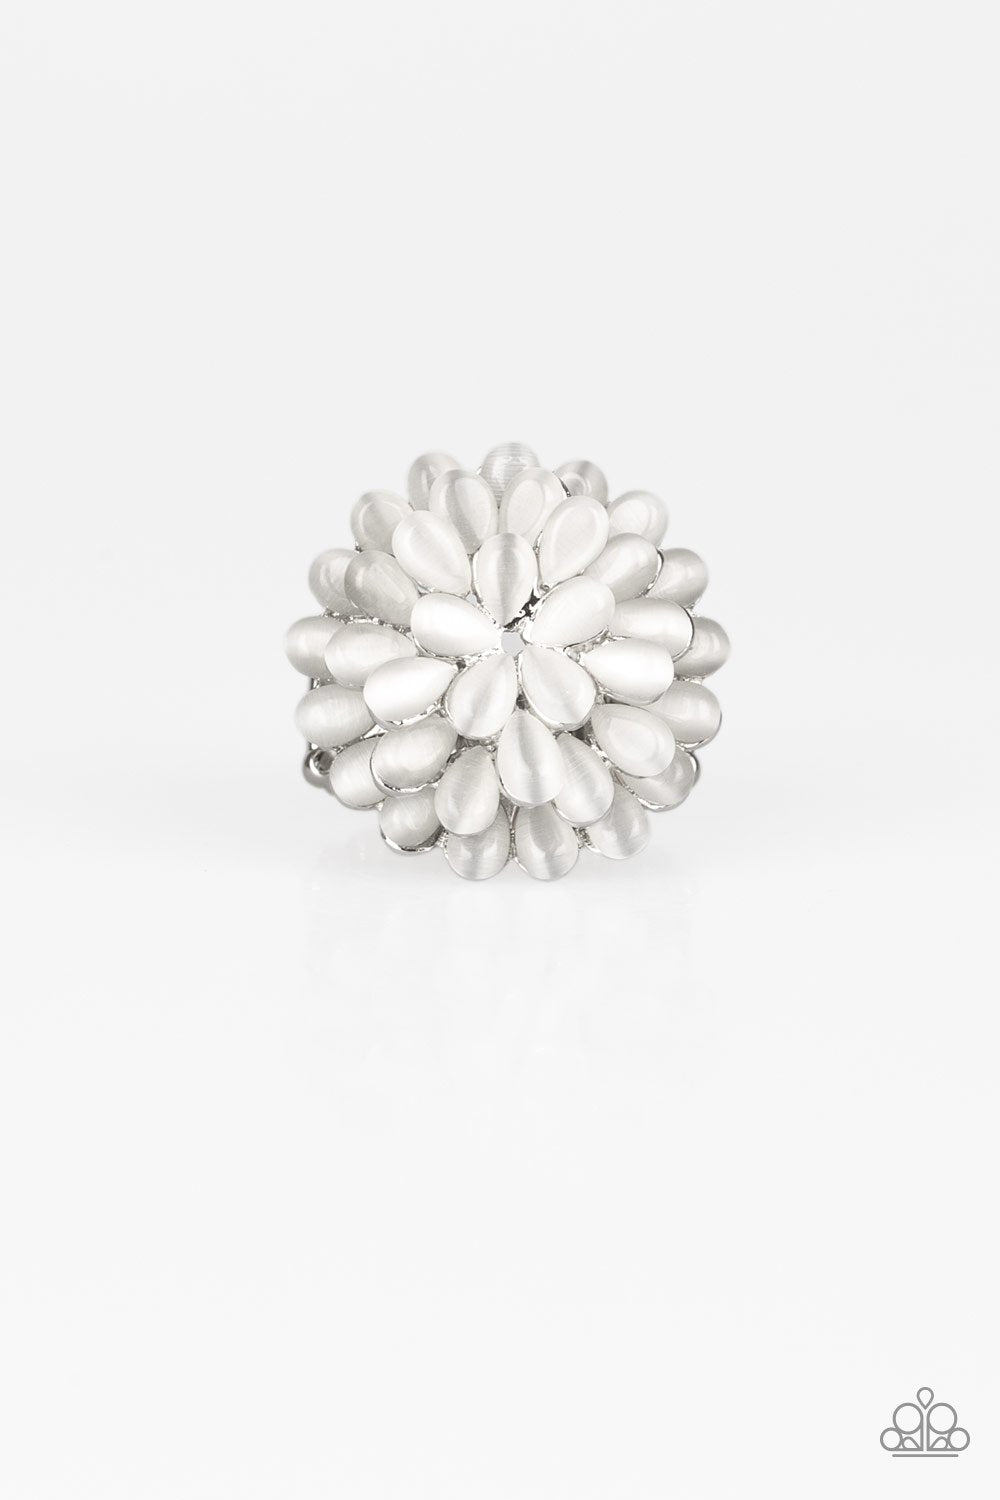 Bloomin Bloomer White Cat's Eye Ring - Paparazzi Accessories-CarasShop.com - $5 Jewelry by Cara Jewels